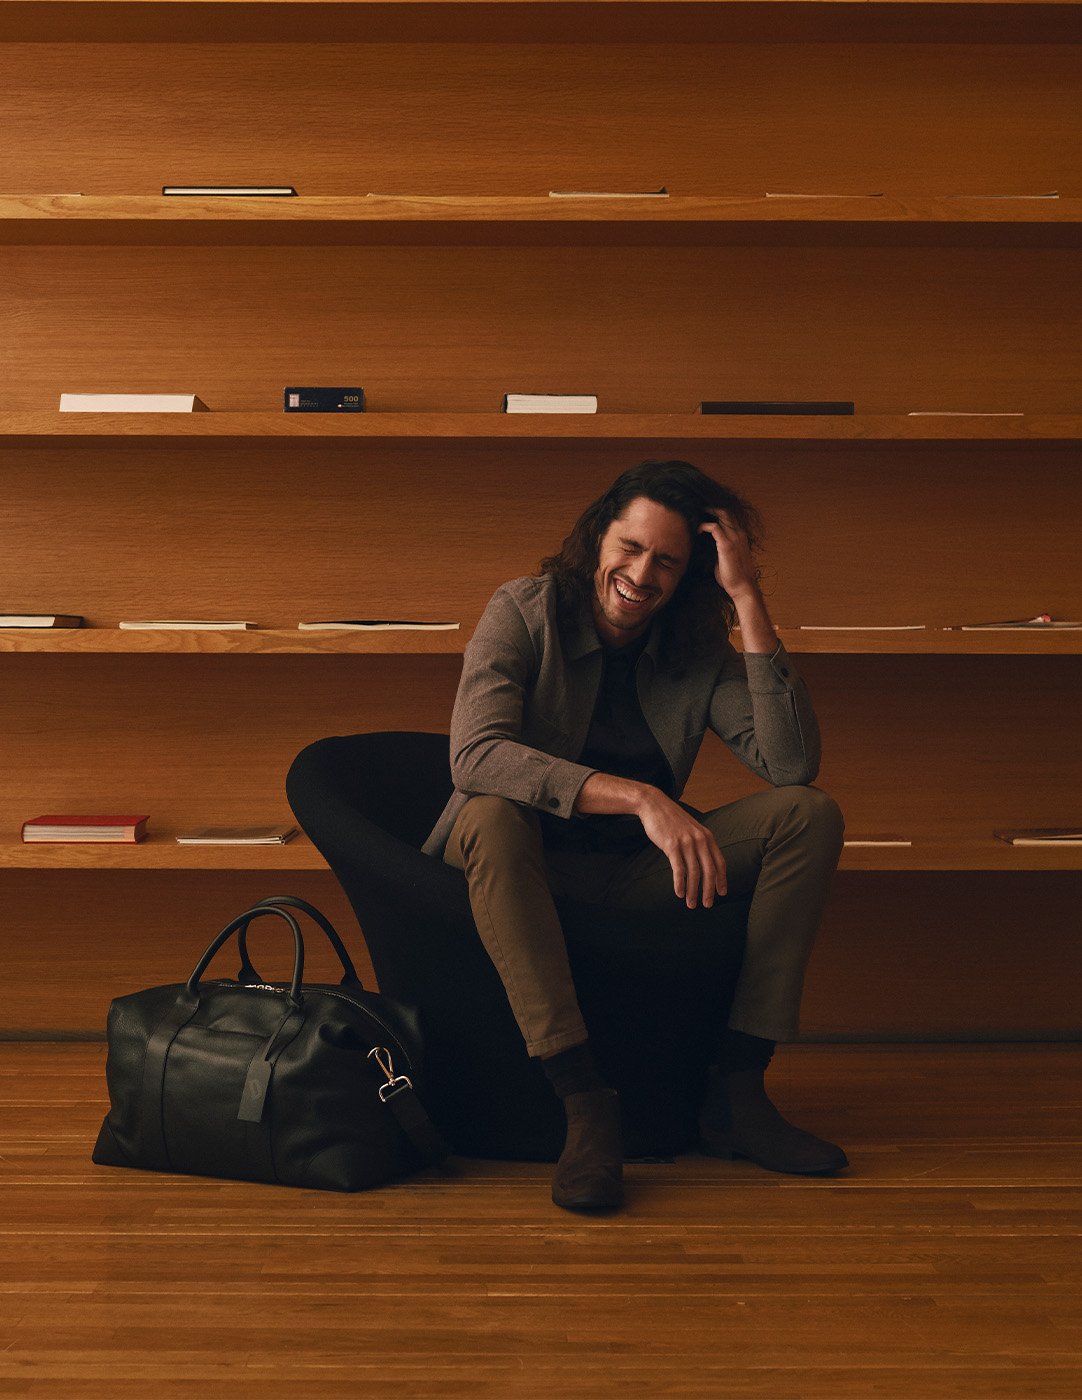 Man sitting in front of book shelves smiling with duffle bag at his feet